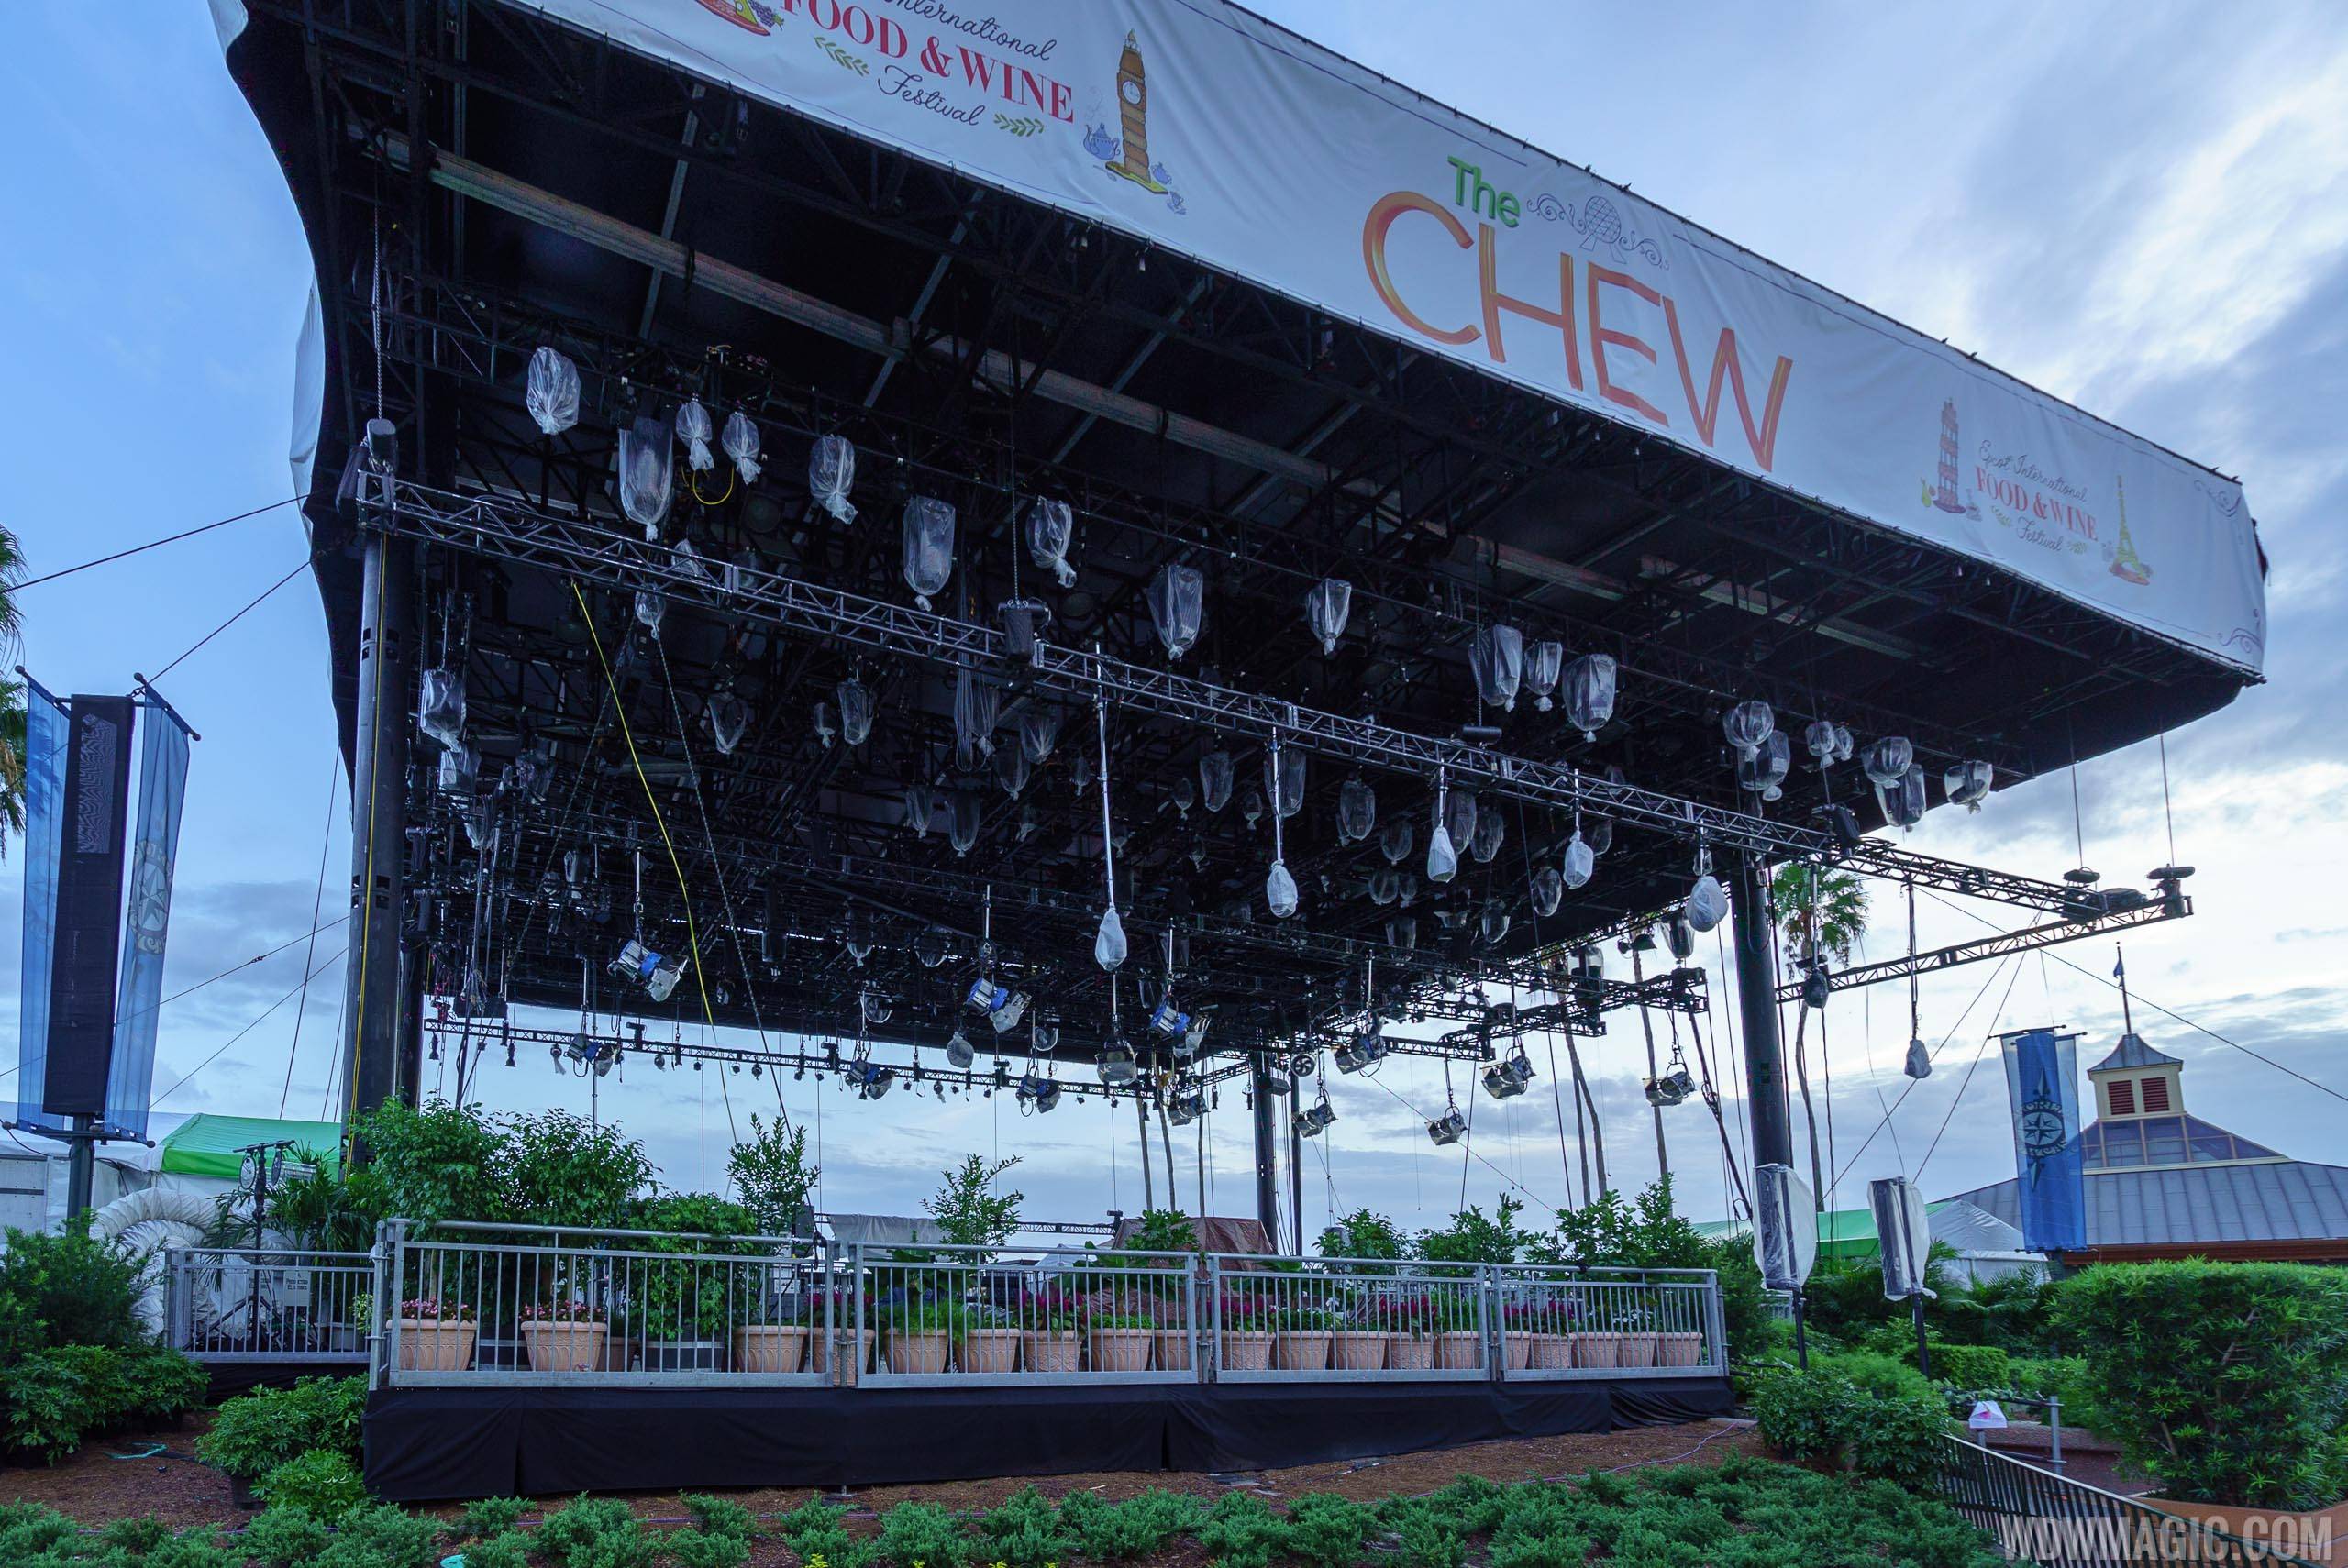 Shows have been recorded at Epcot in 2017, including The CHEW and Wheel of Fortune